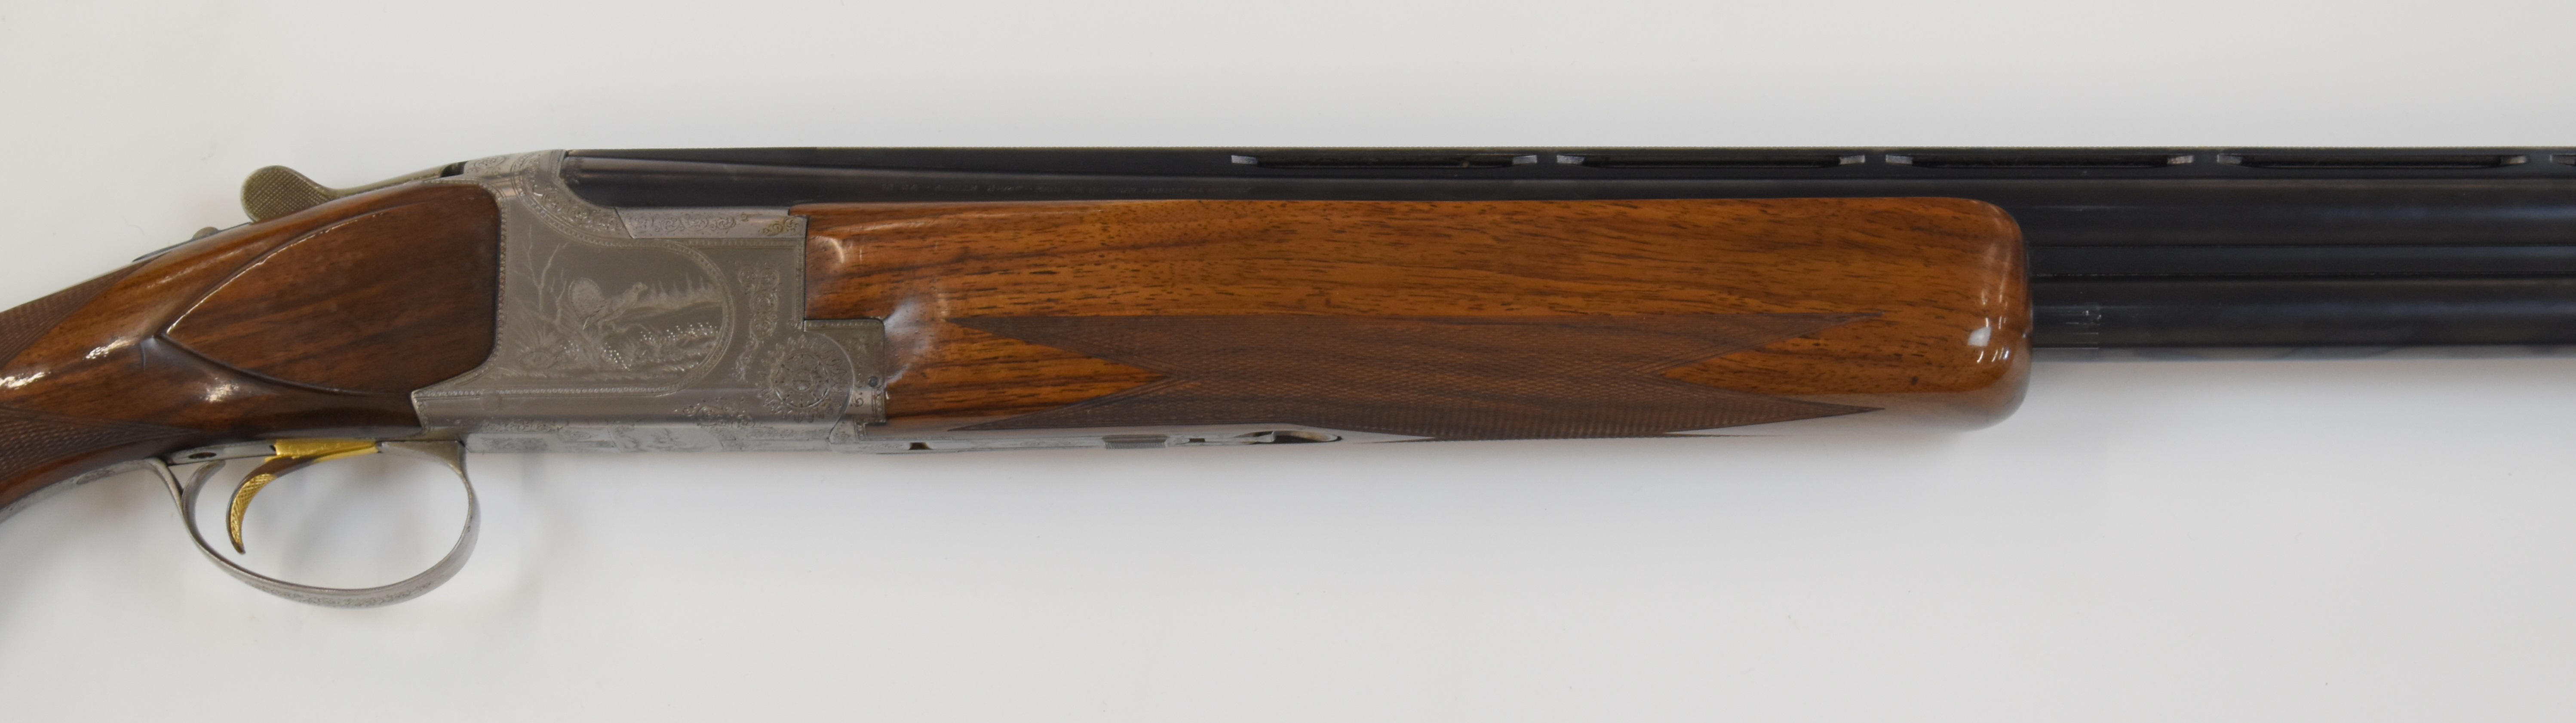 Browning B2 12 bore over and under shotgun with engraved scenes of birds to the locks and underside, - Image 4 of 12